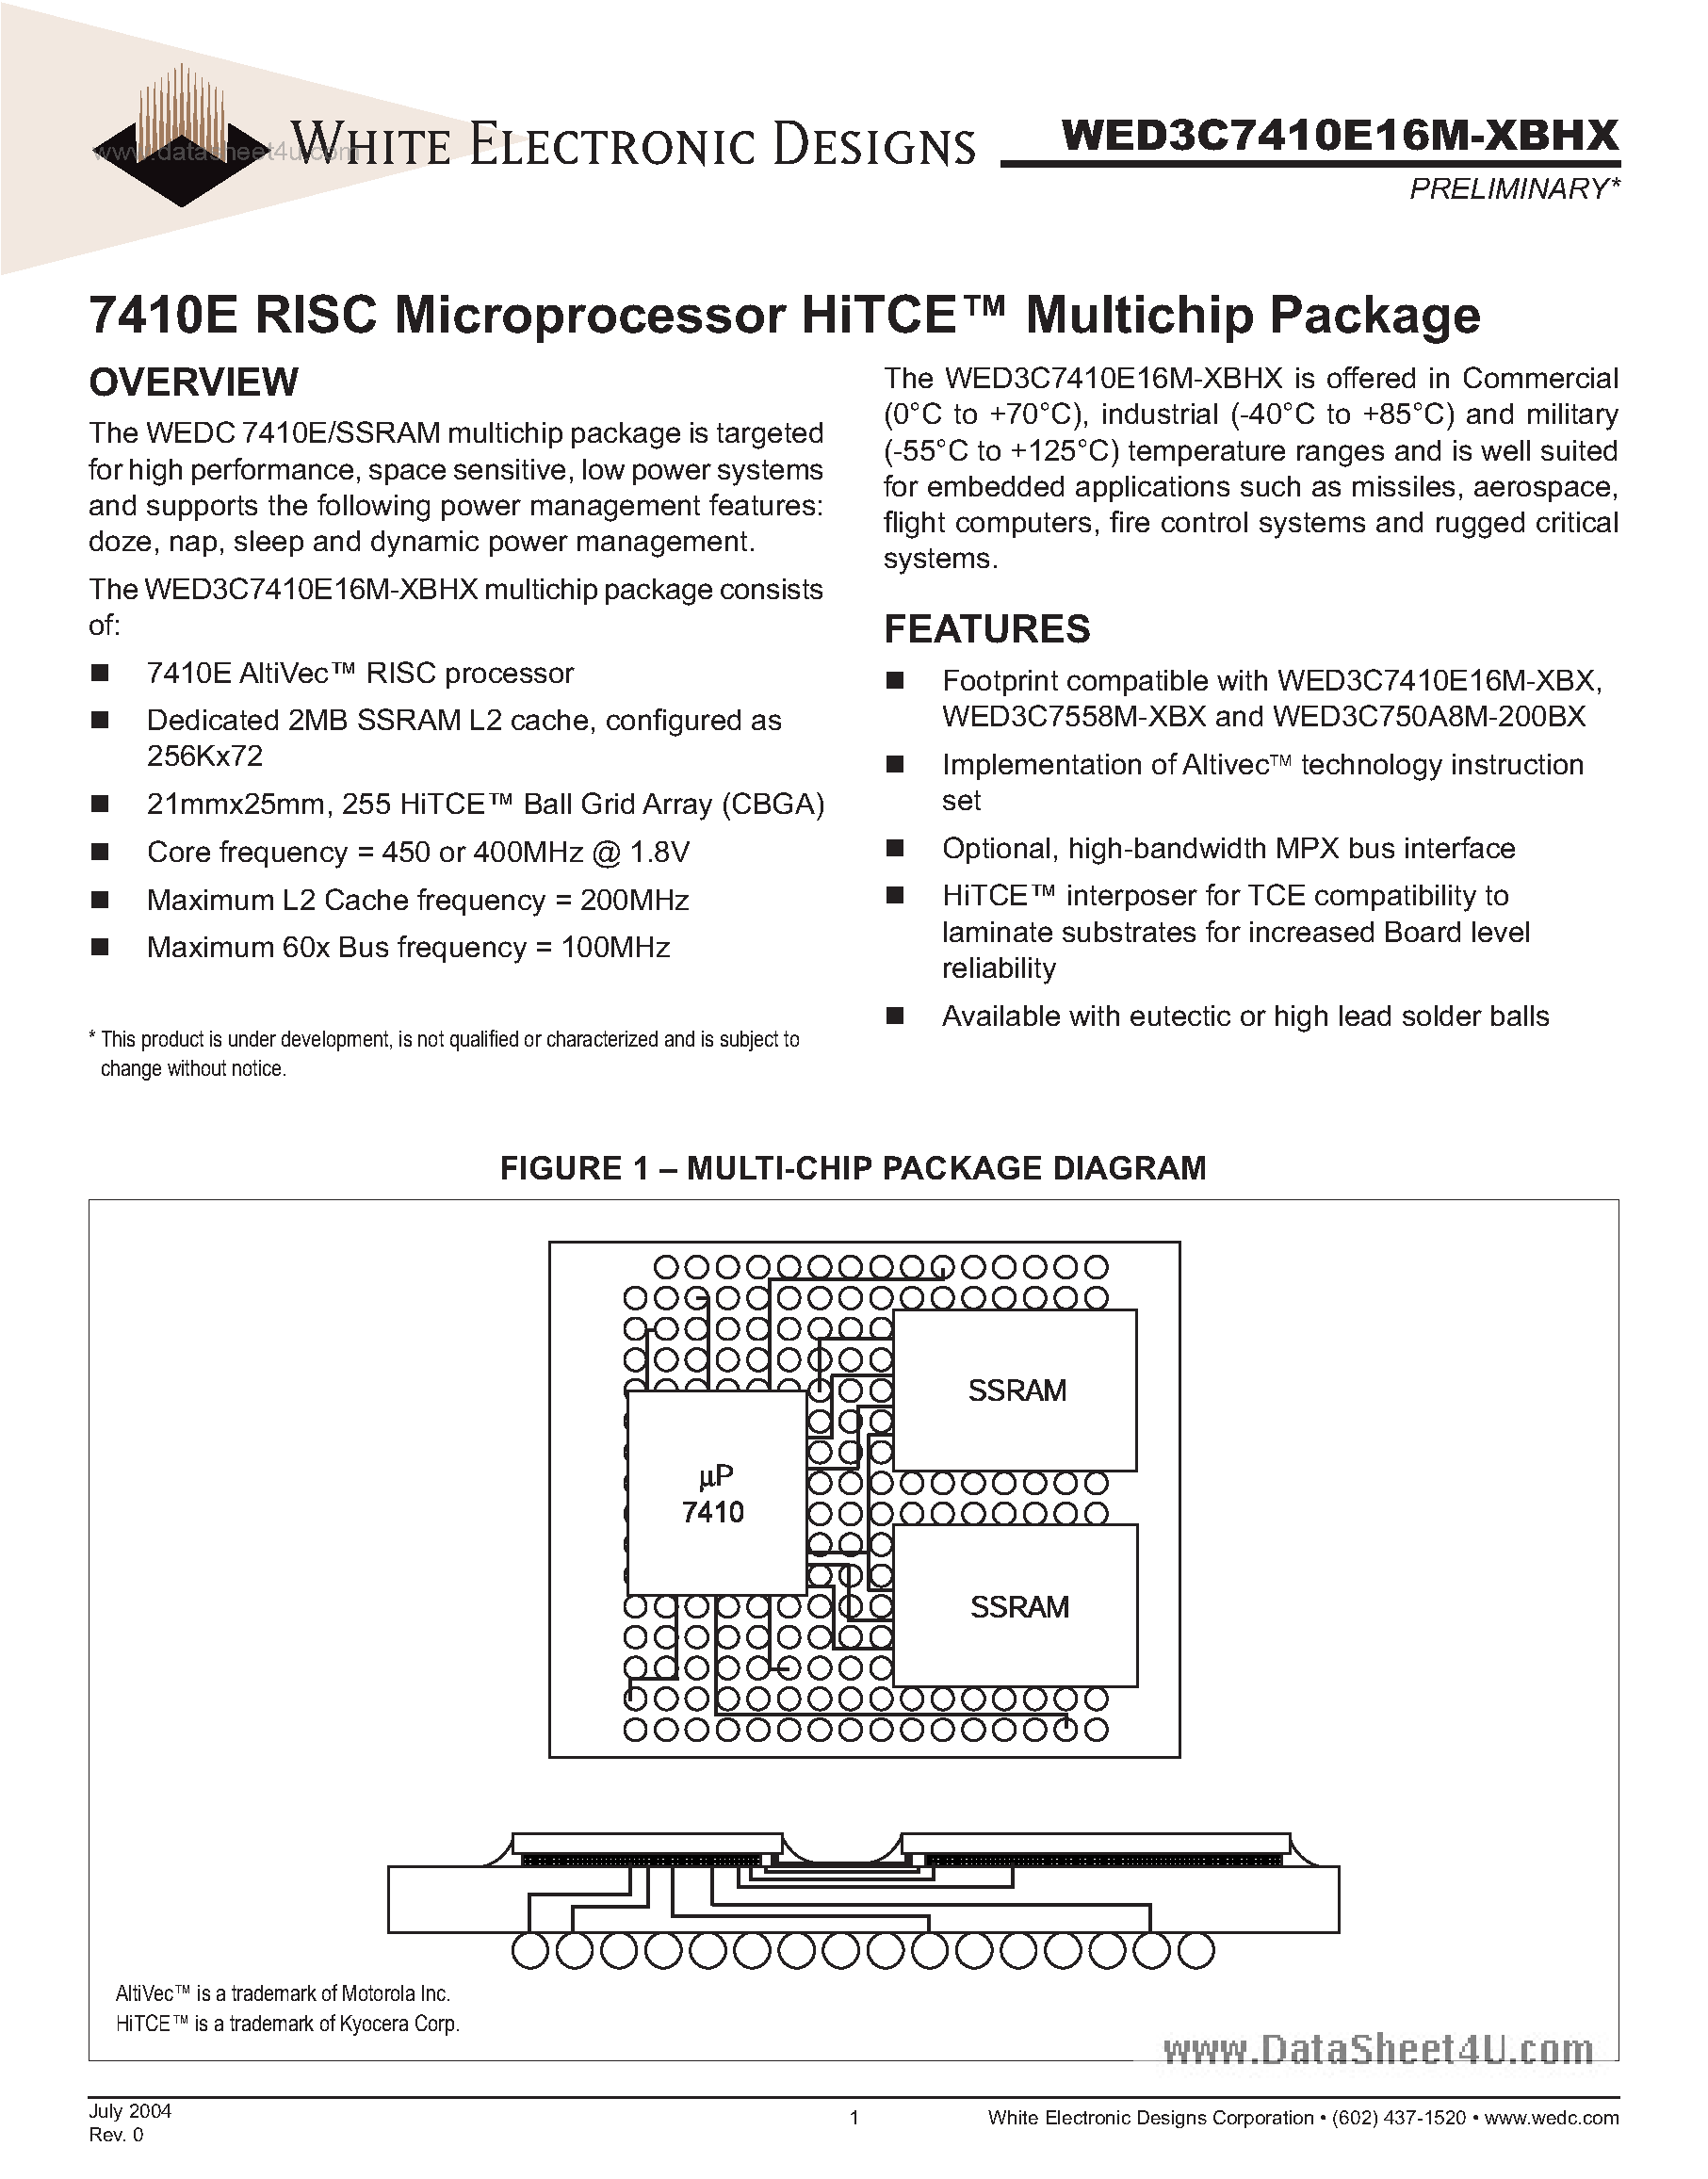 Даташит WED3C7410E16M-XBHX - 7410E RISC Microprocessor HiTCETM Multichip Package страница 1